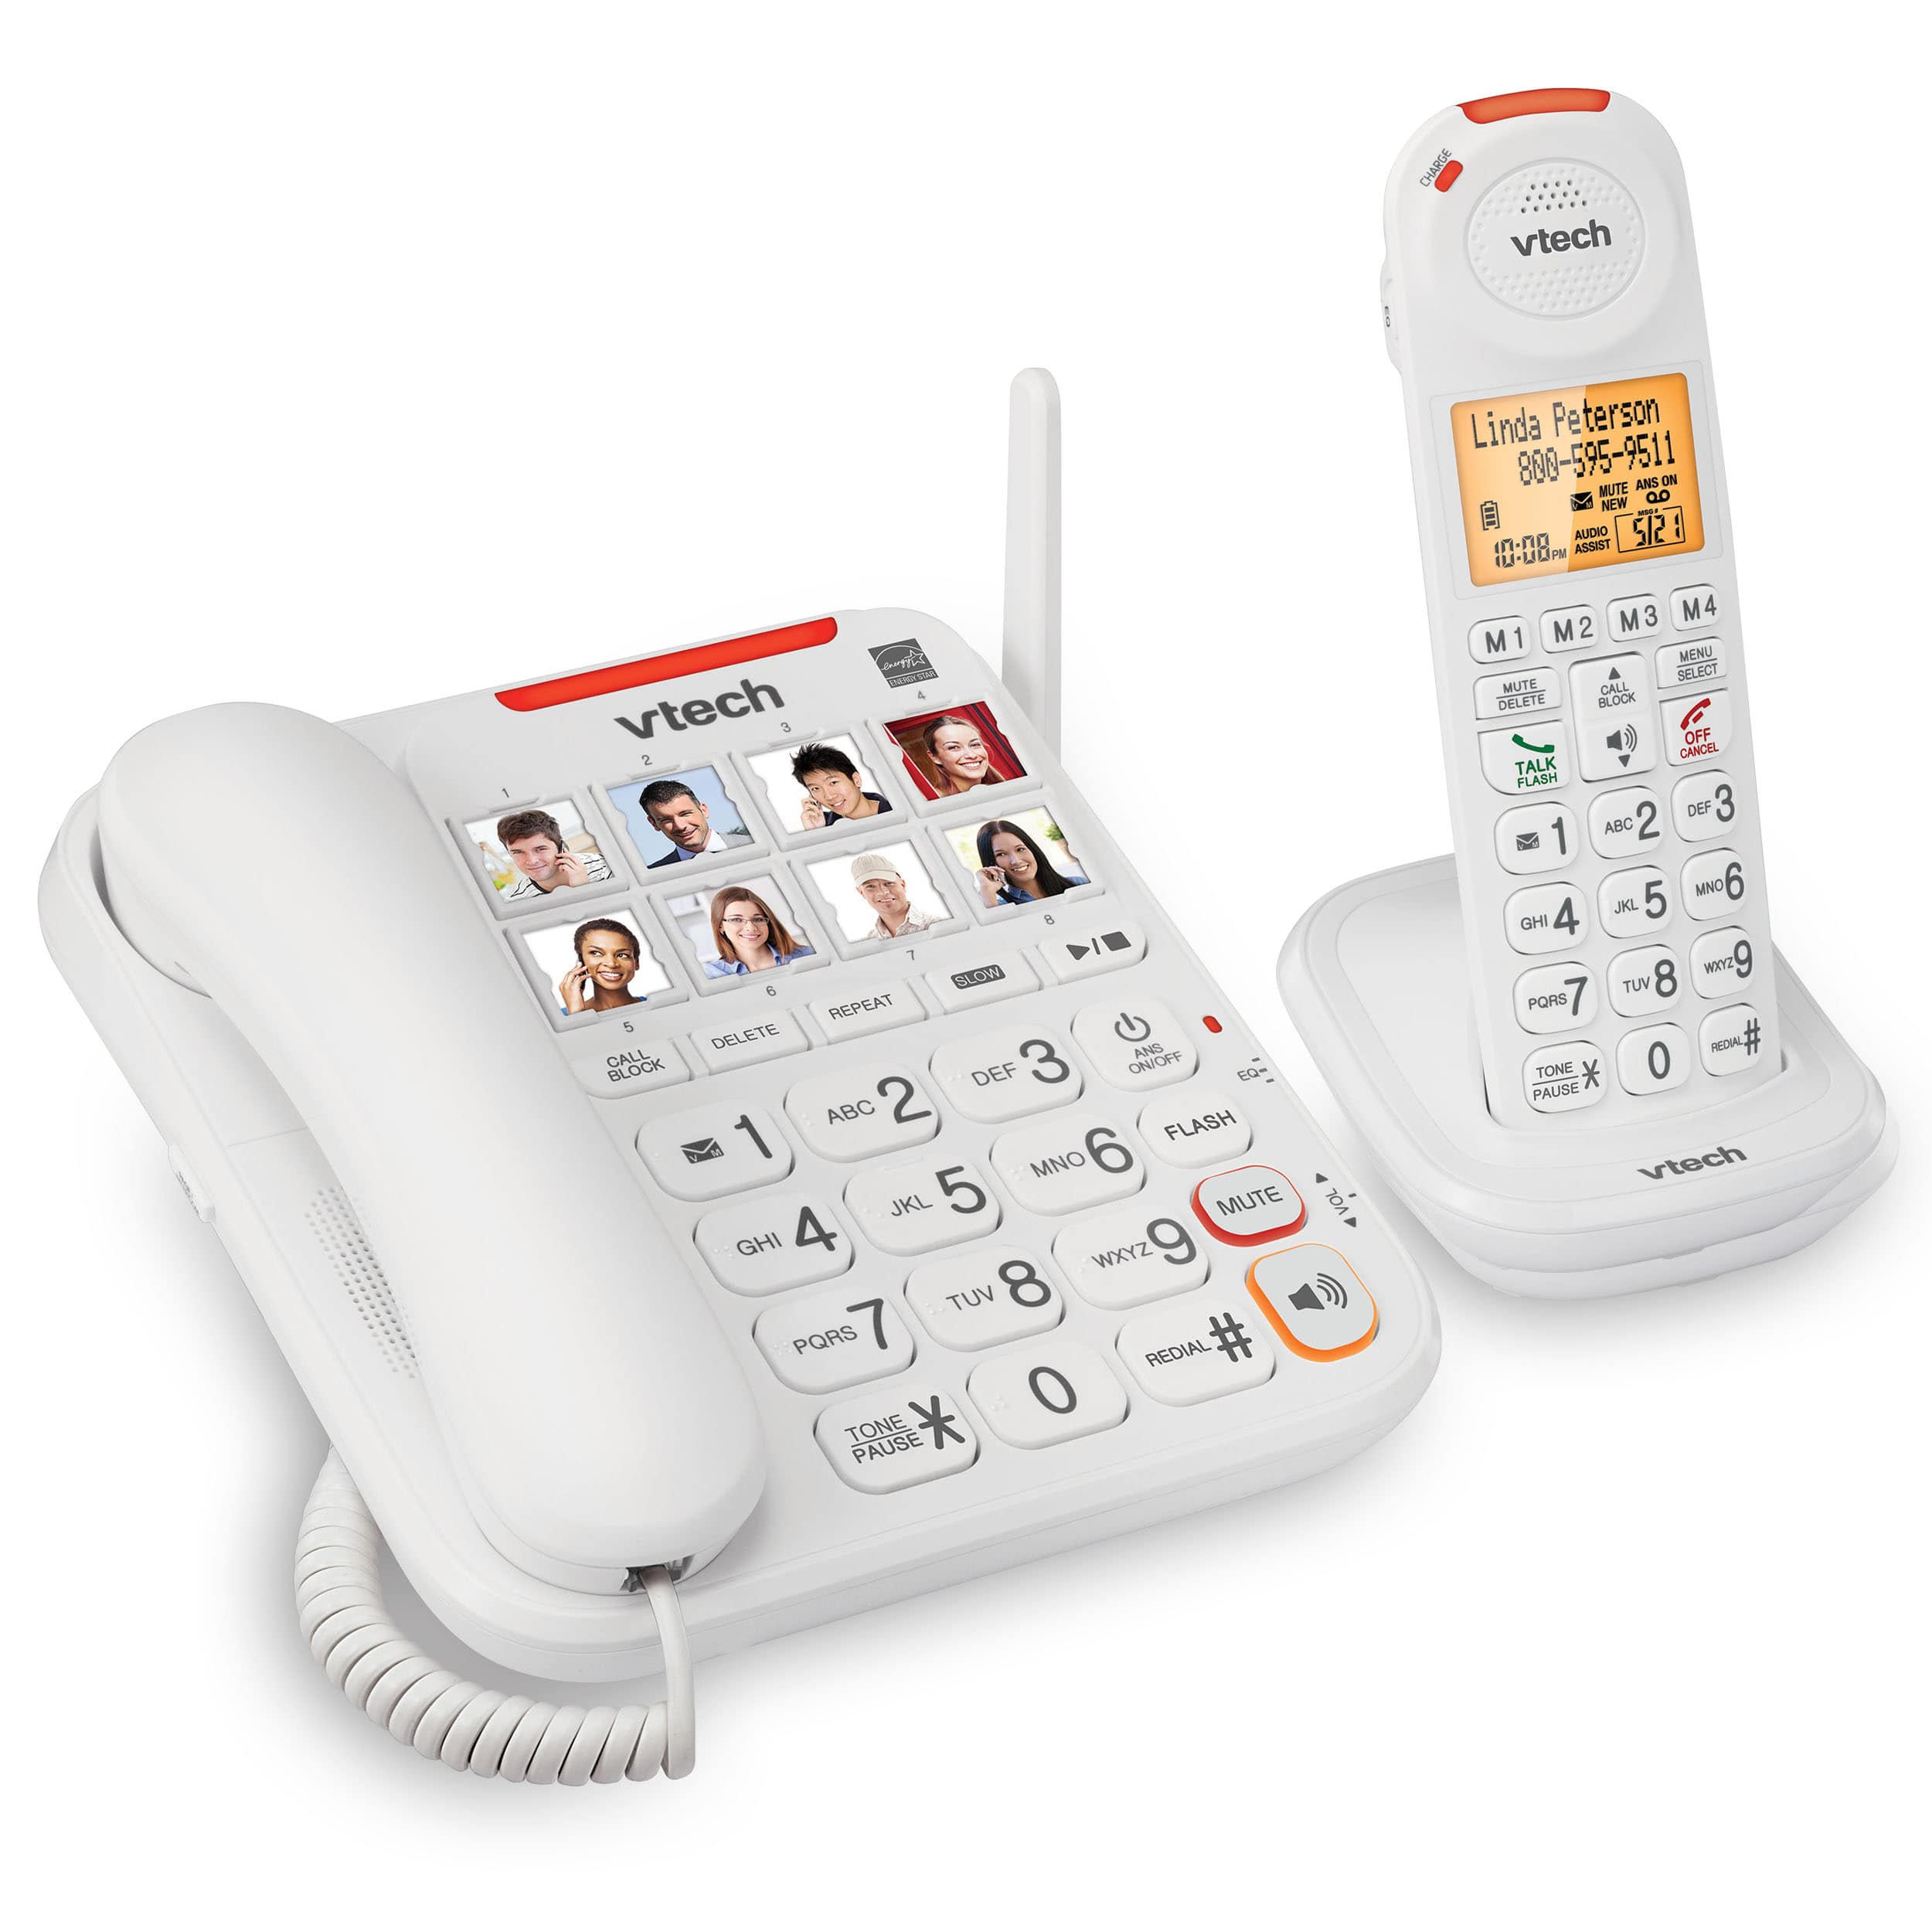 Amplified Corded/Cordless Phone with Answering System, Big Buttons, Extra-Loud Ringer & Smart Call Blocker - view 3